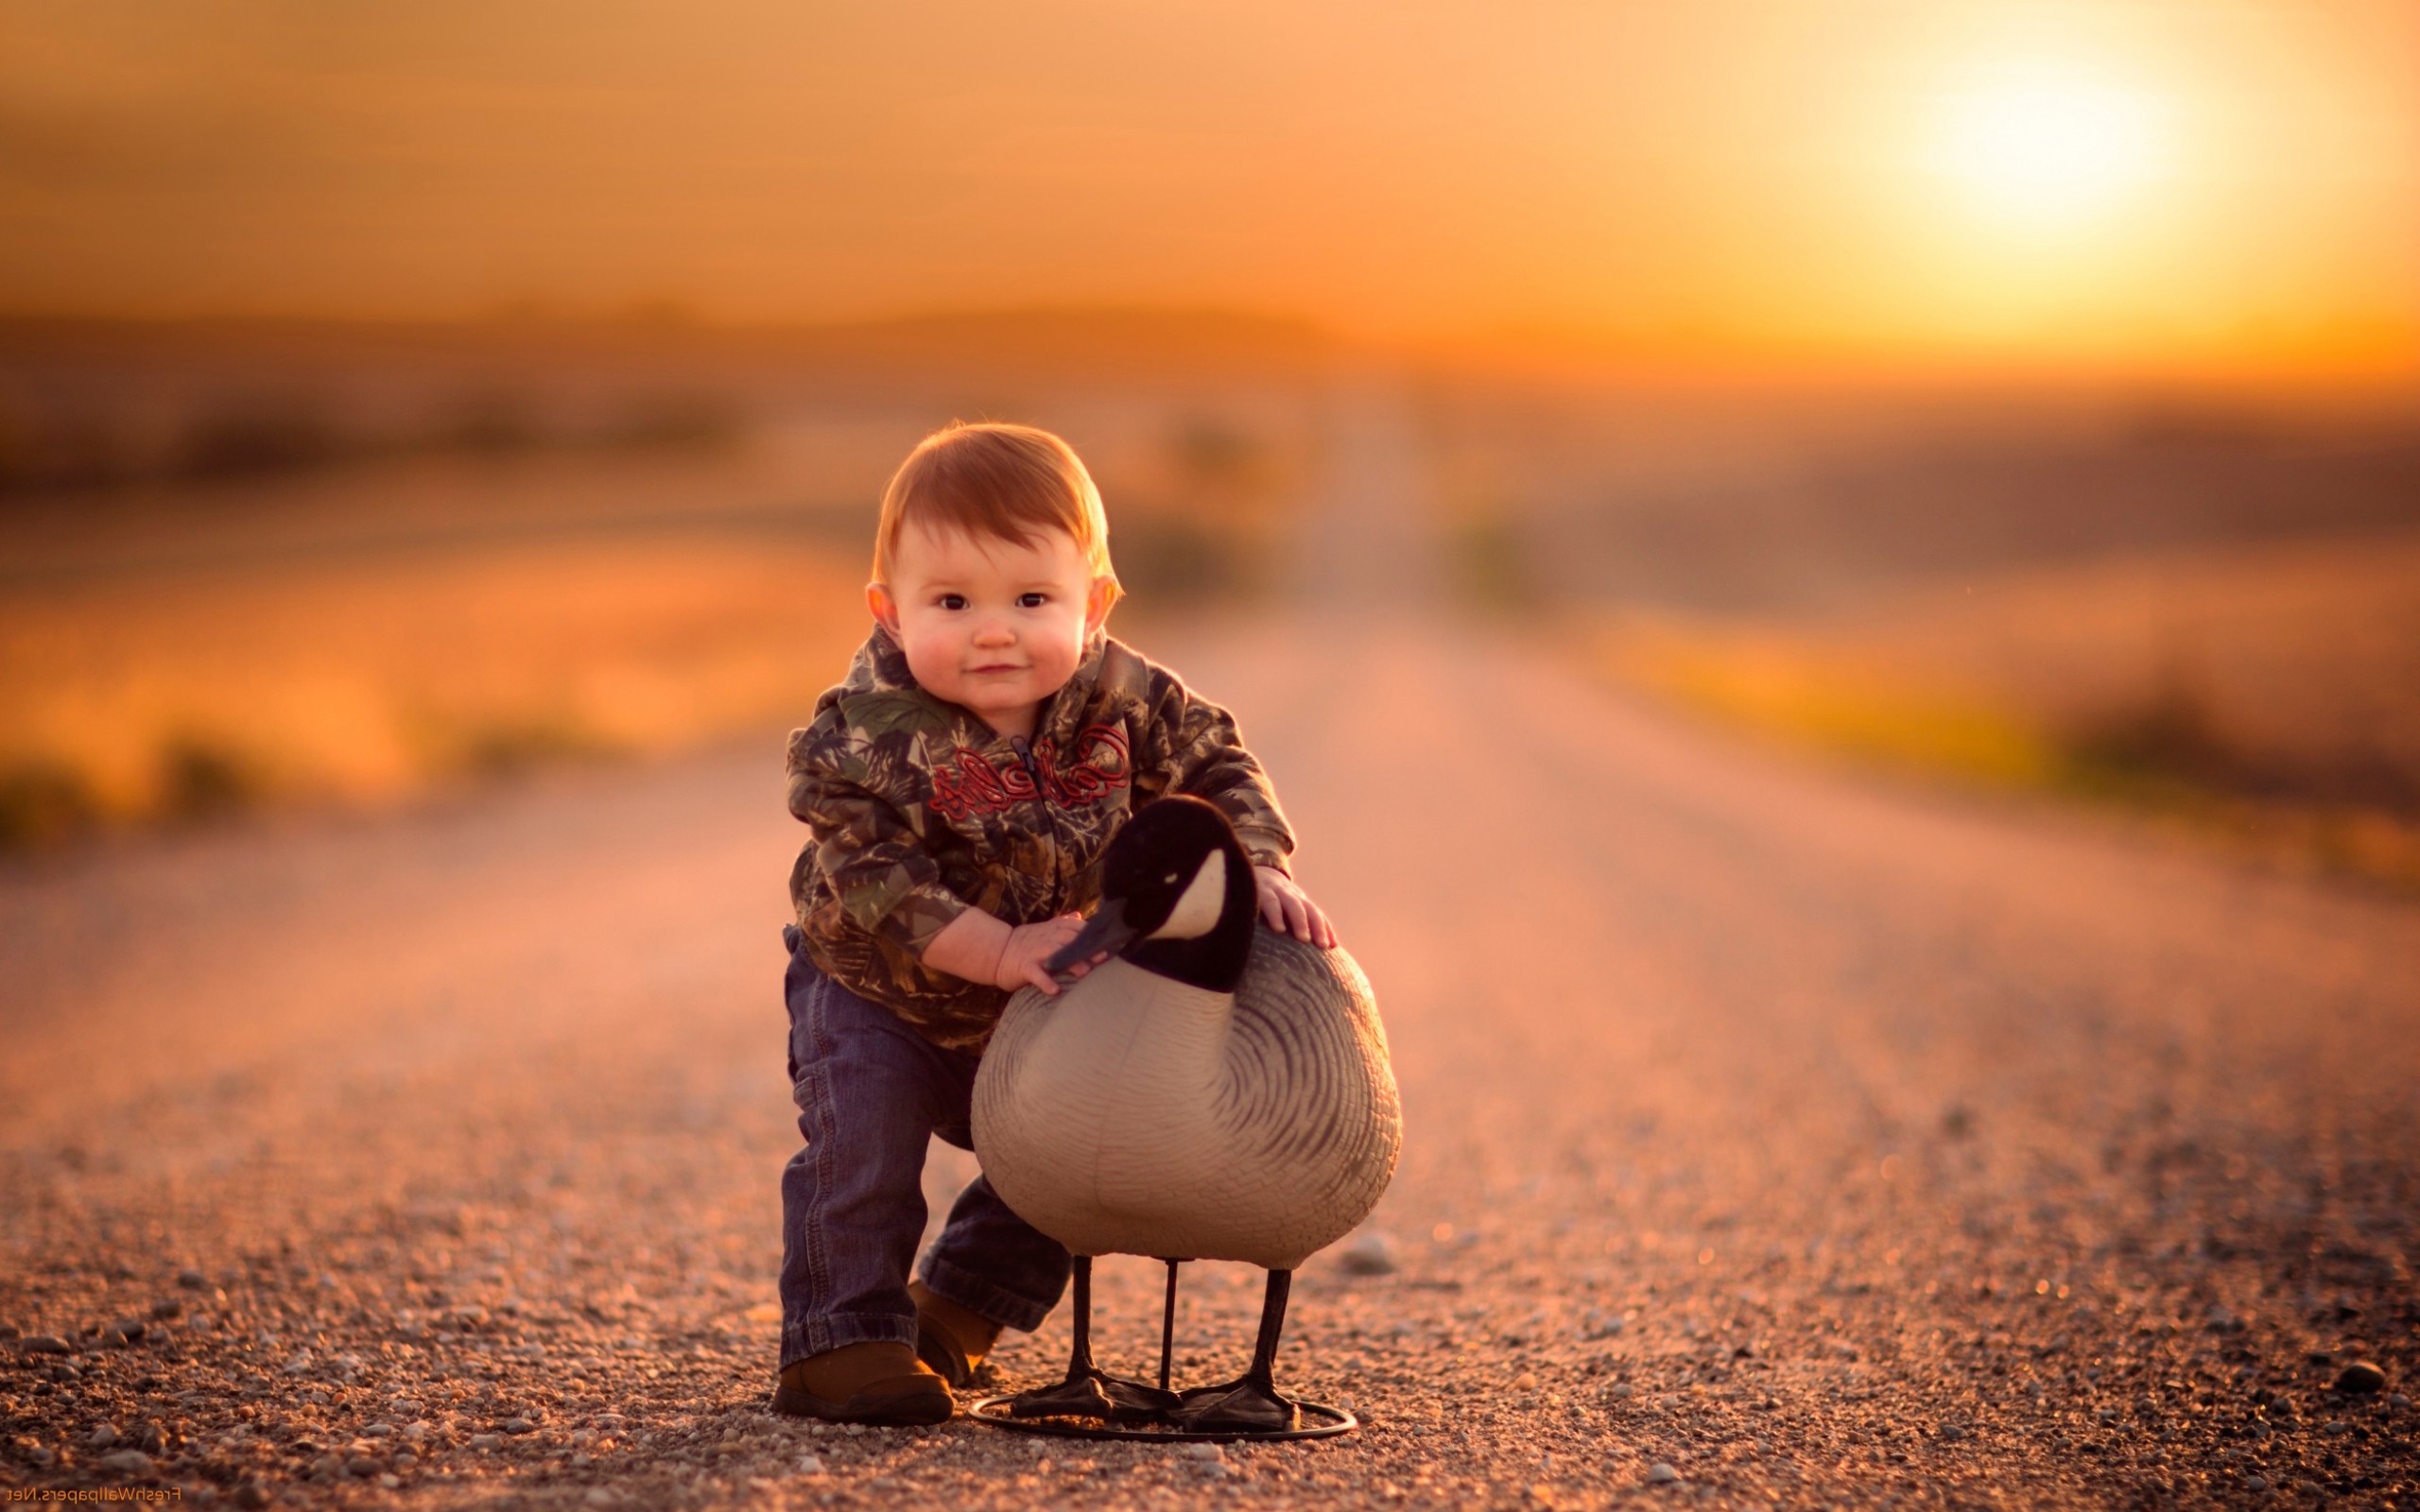 Little Boy at Road Wallpapers - New HD Wallpapers